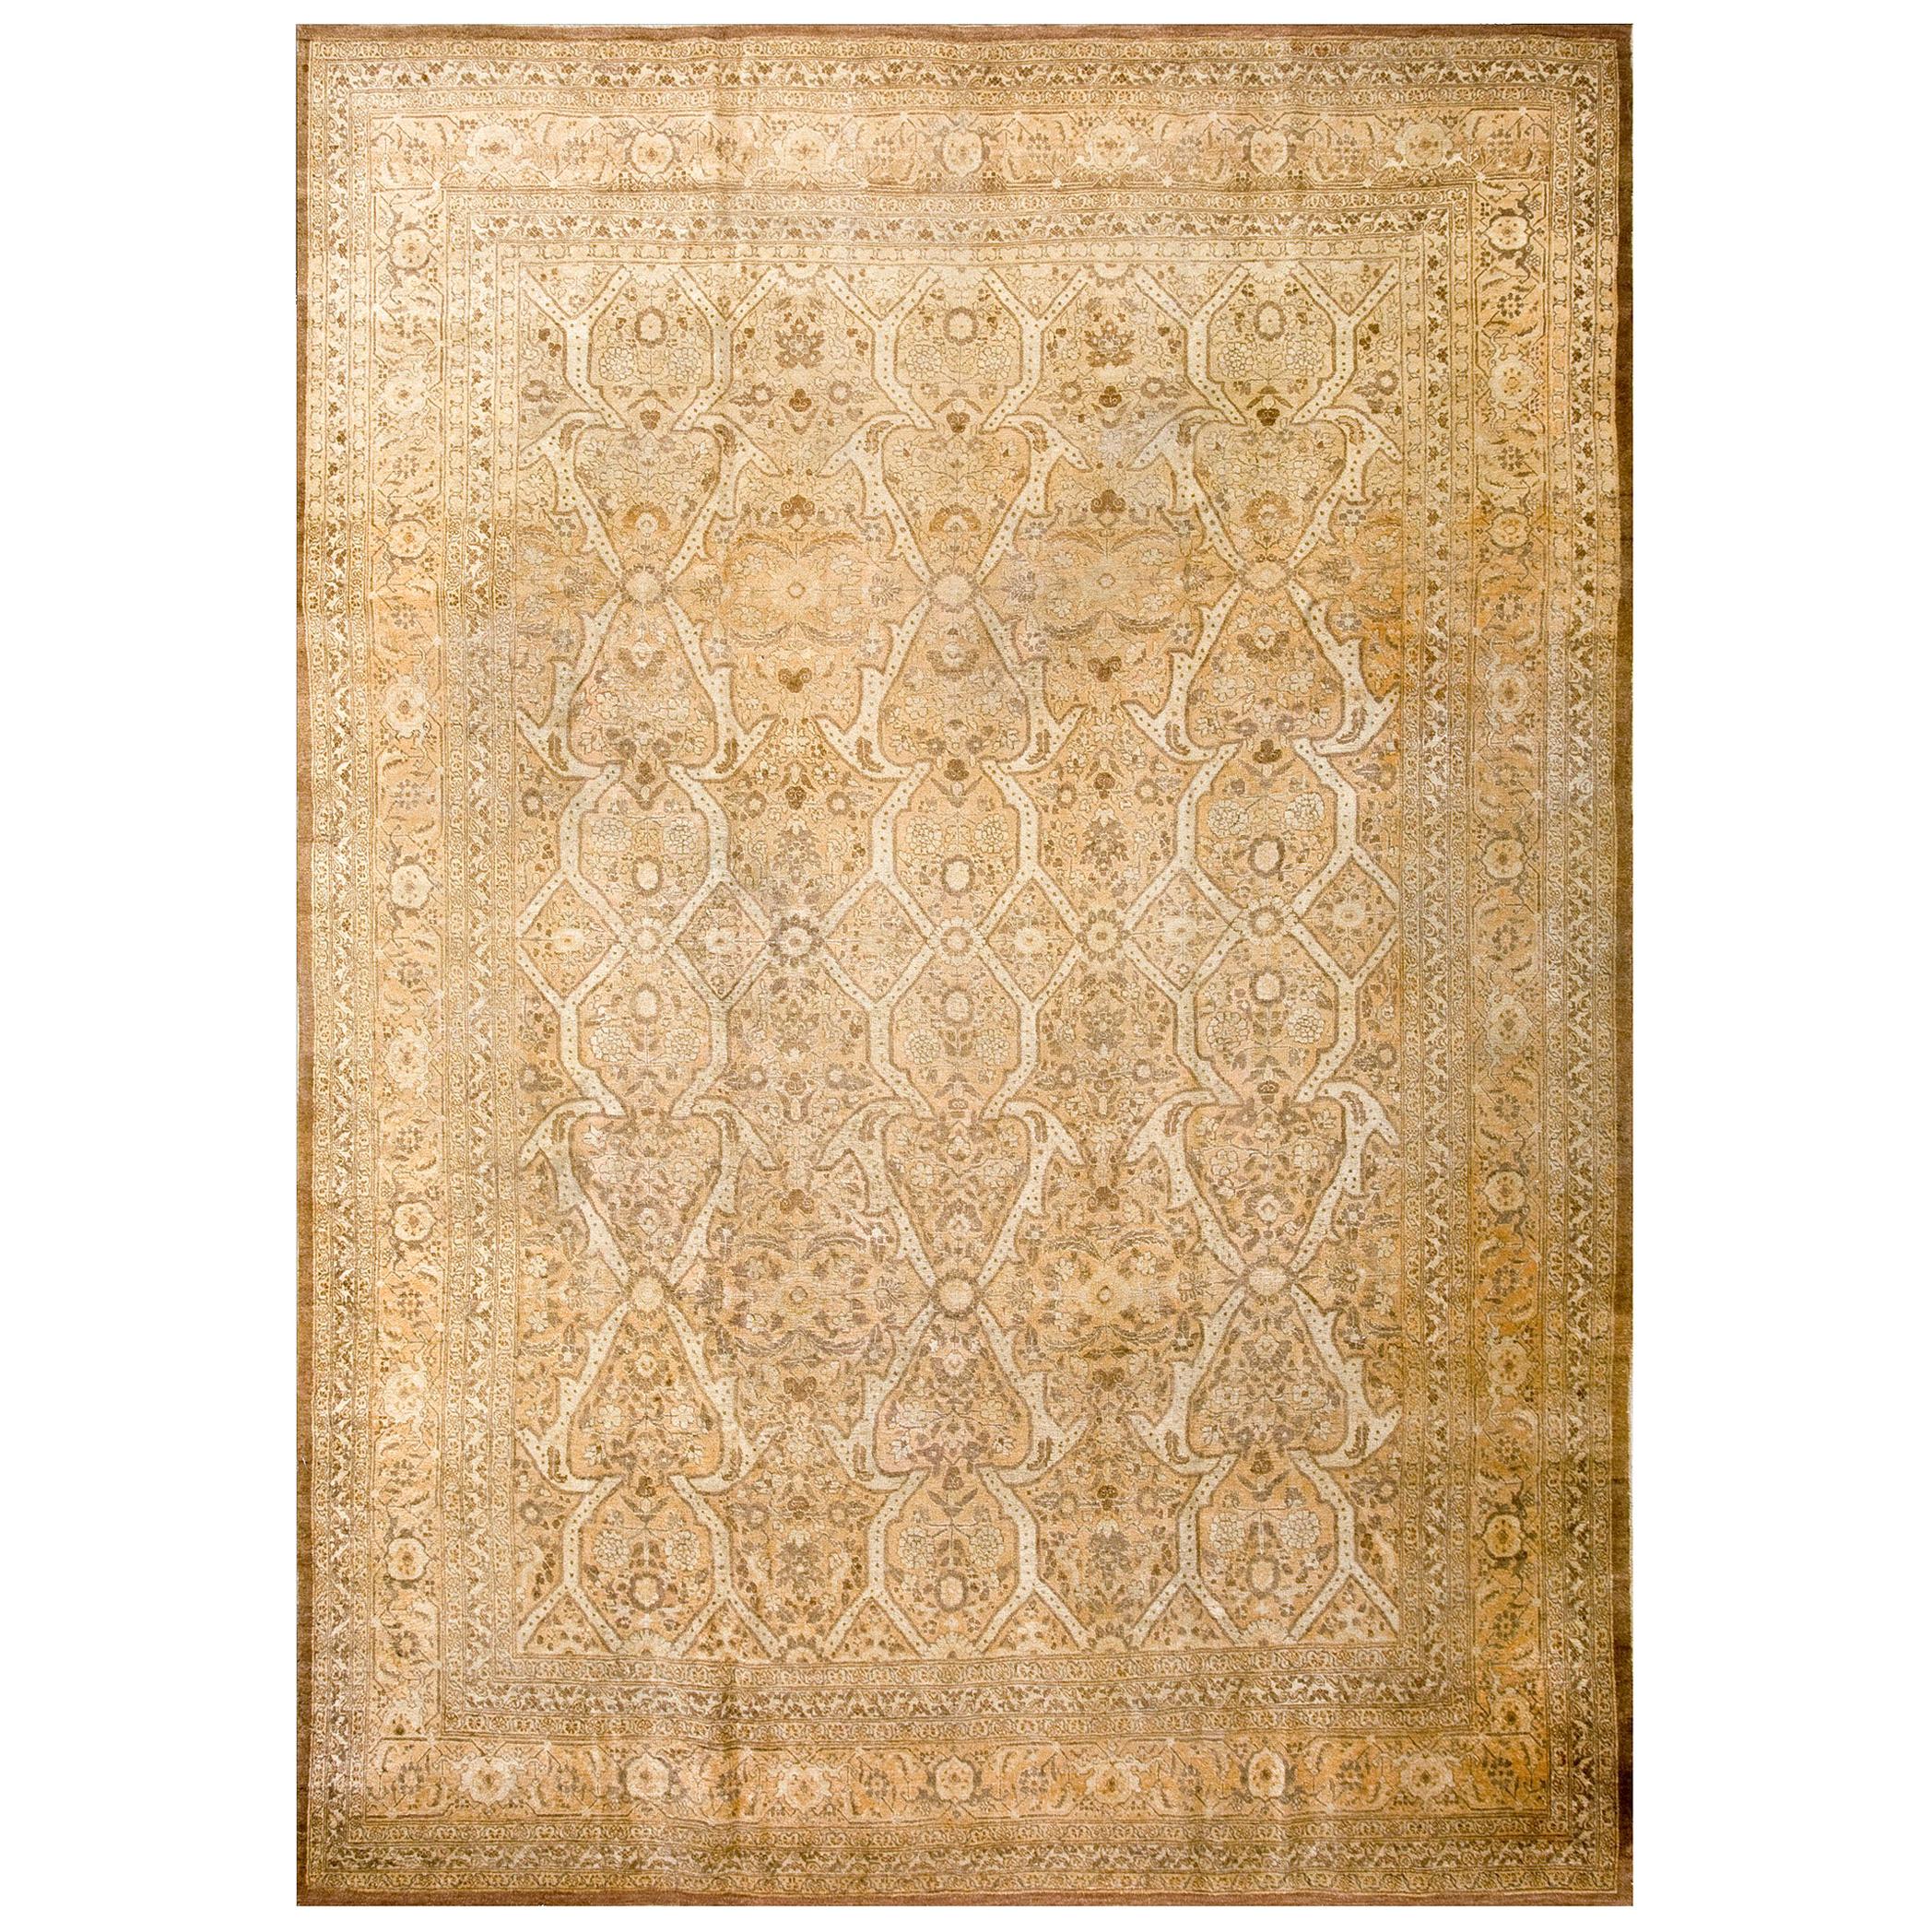 Early 20th Century Persian Tabriz Carpet ( 9 3" x 13' - 282 x 396 ) For Sale